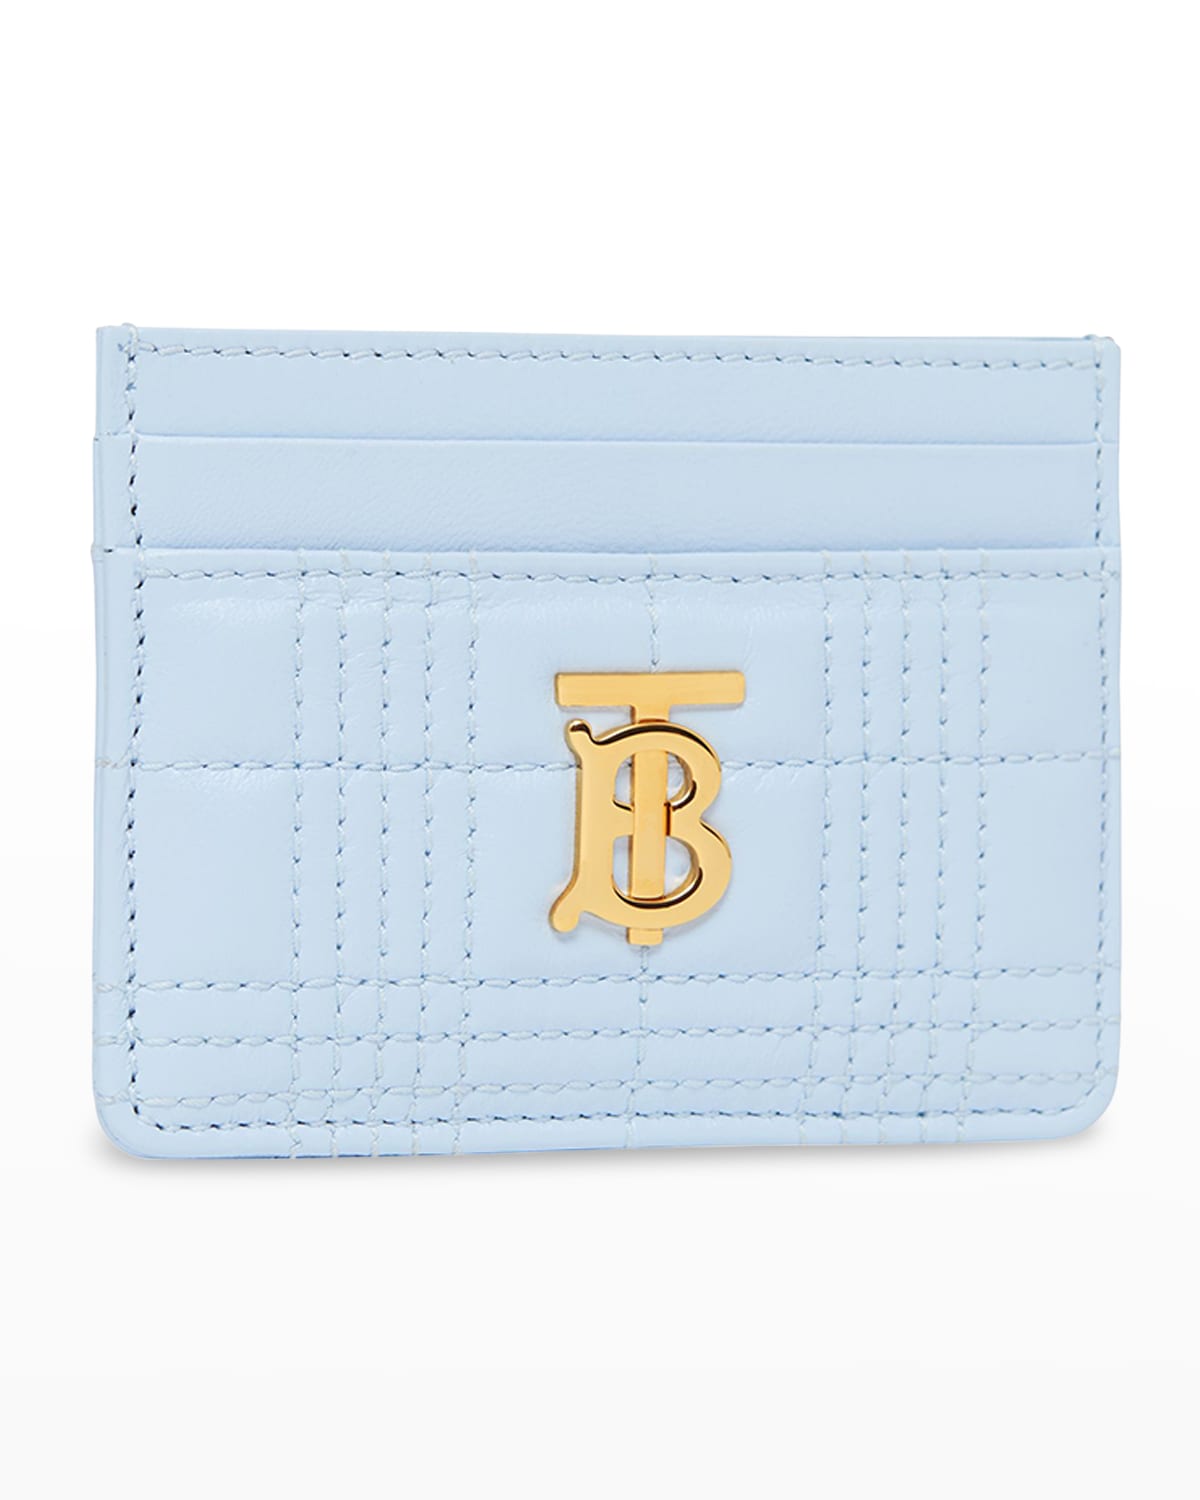 Lola TB Quilted Leather Card Case